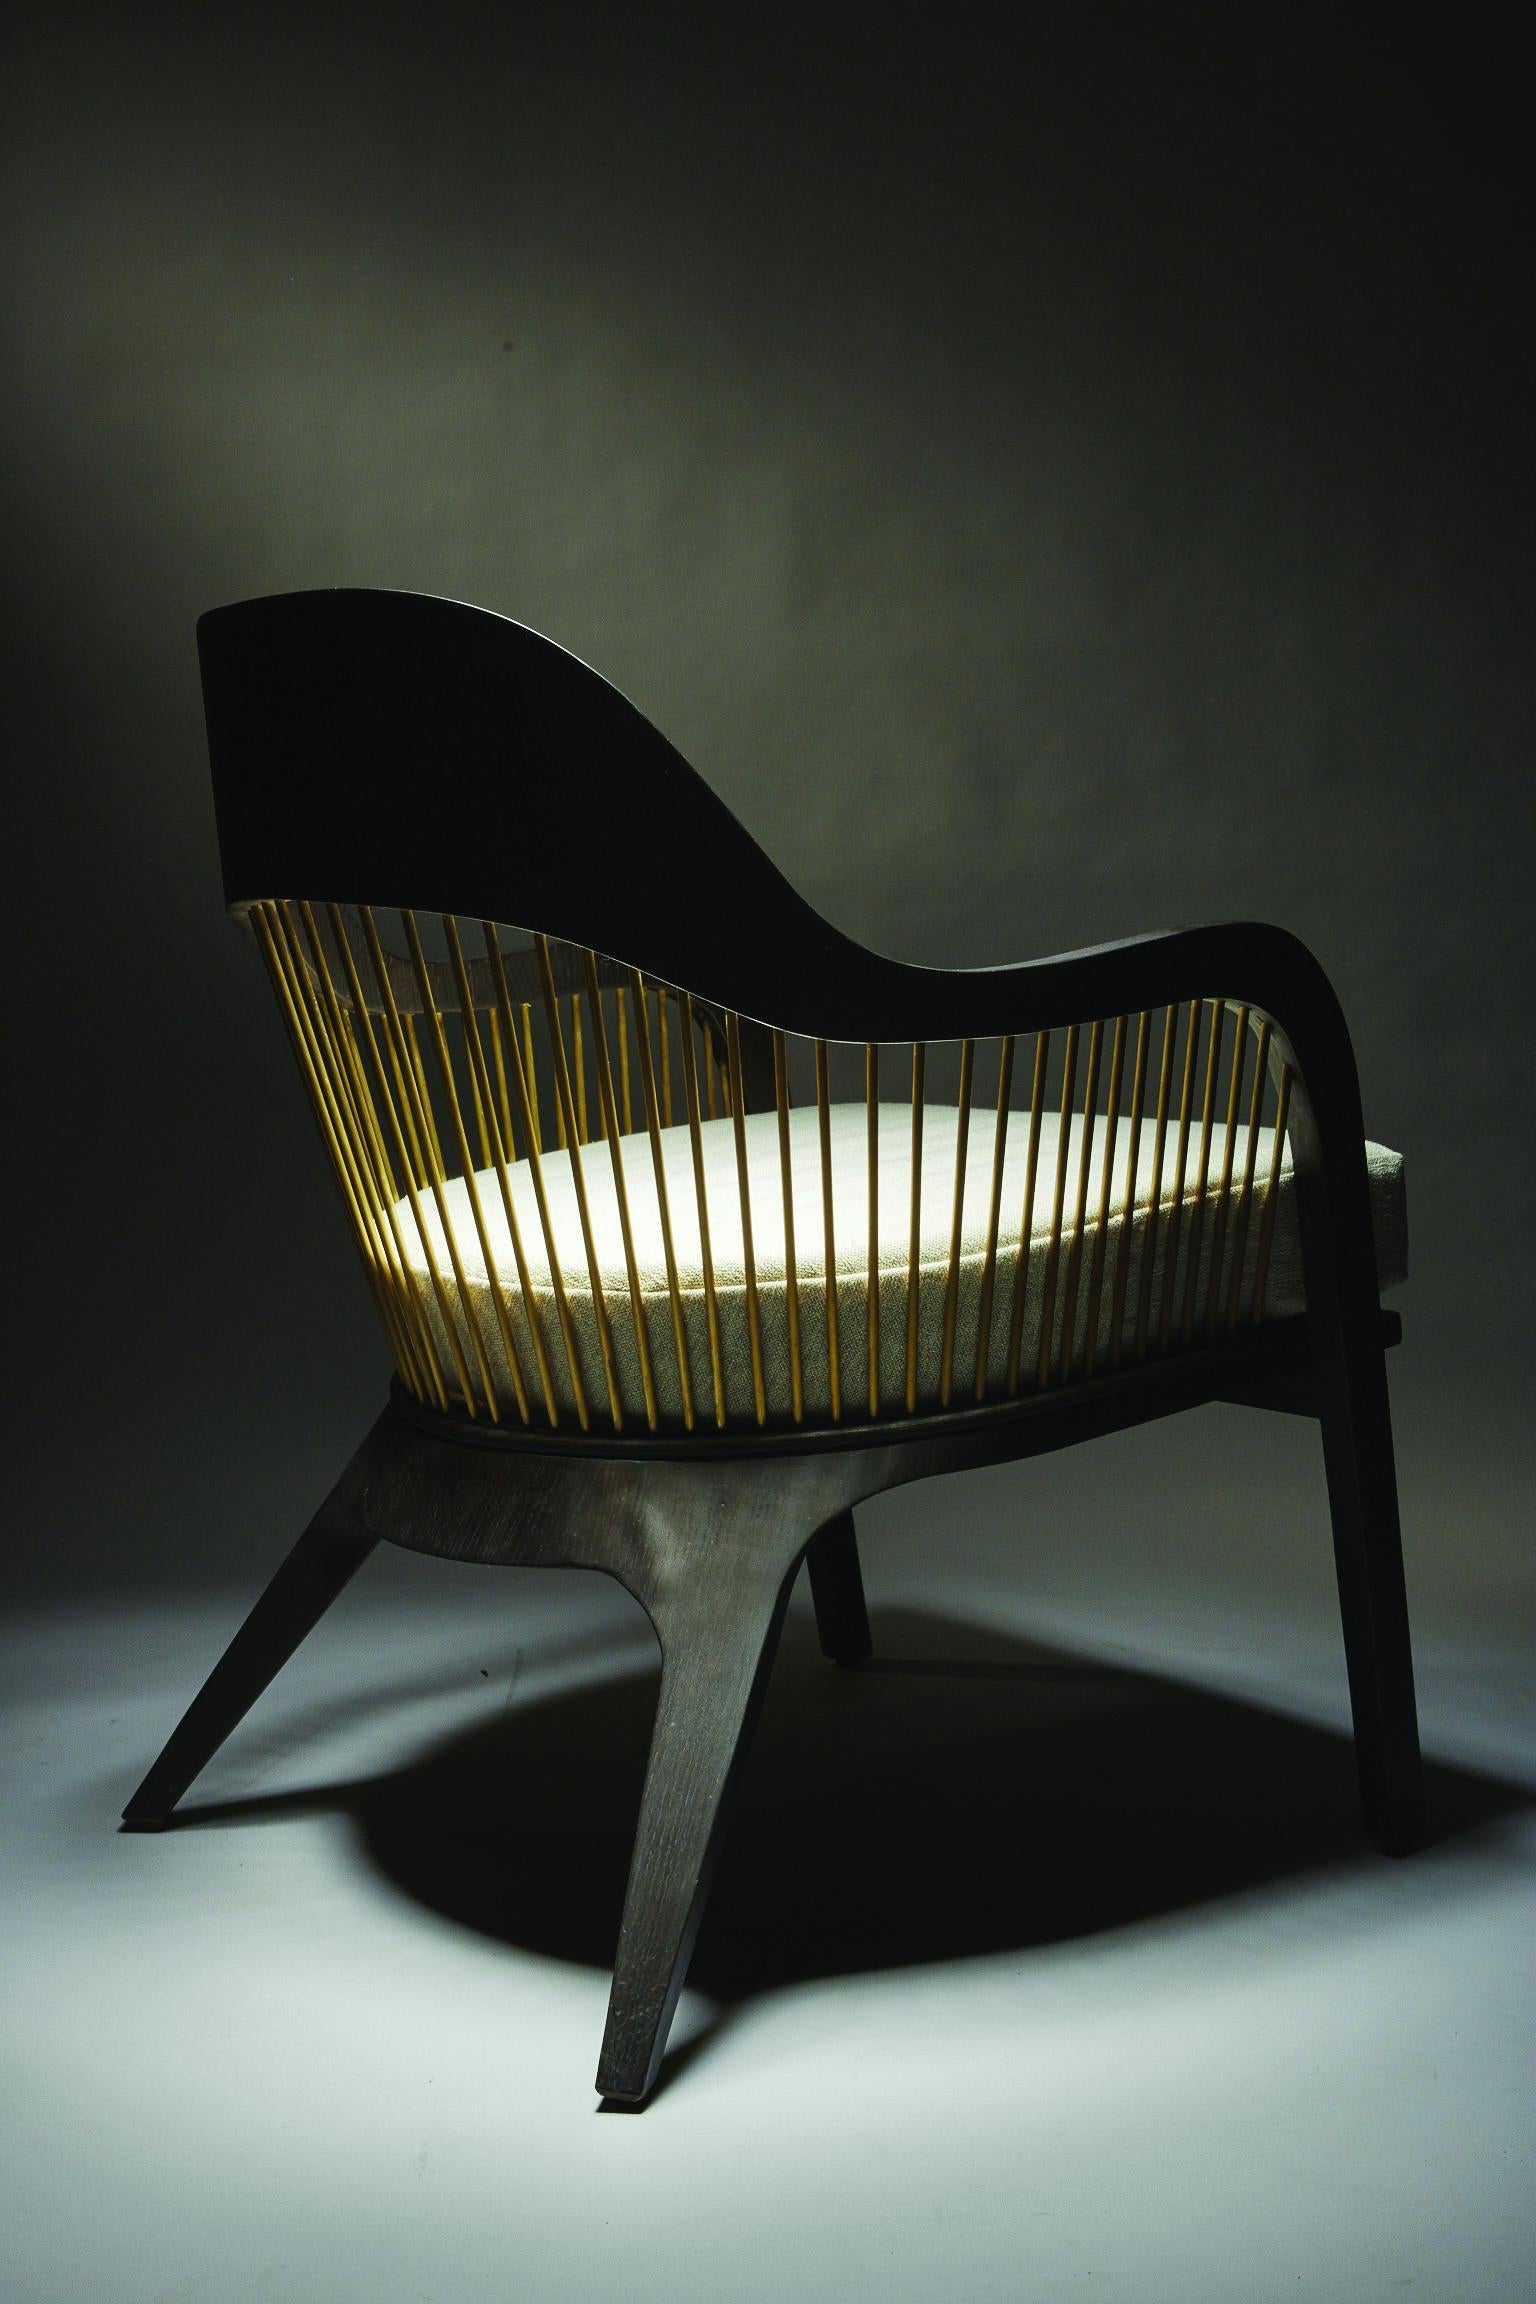 Burnished Chair, LANKA, by Reda Amalou Design, 2015 For Sale